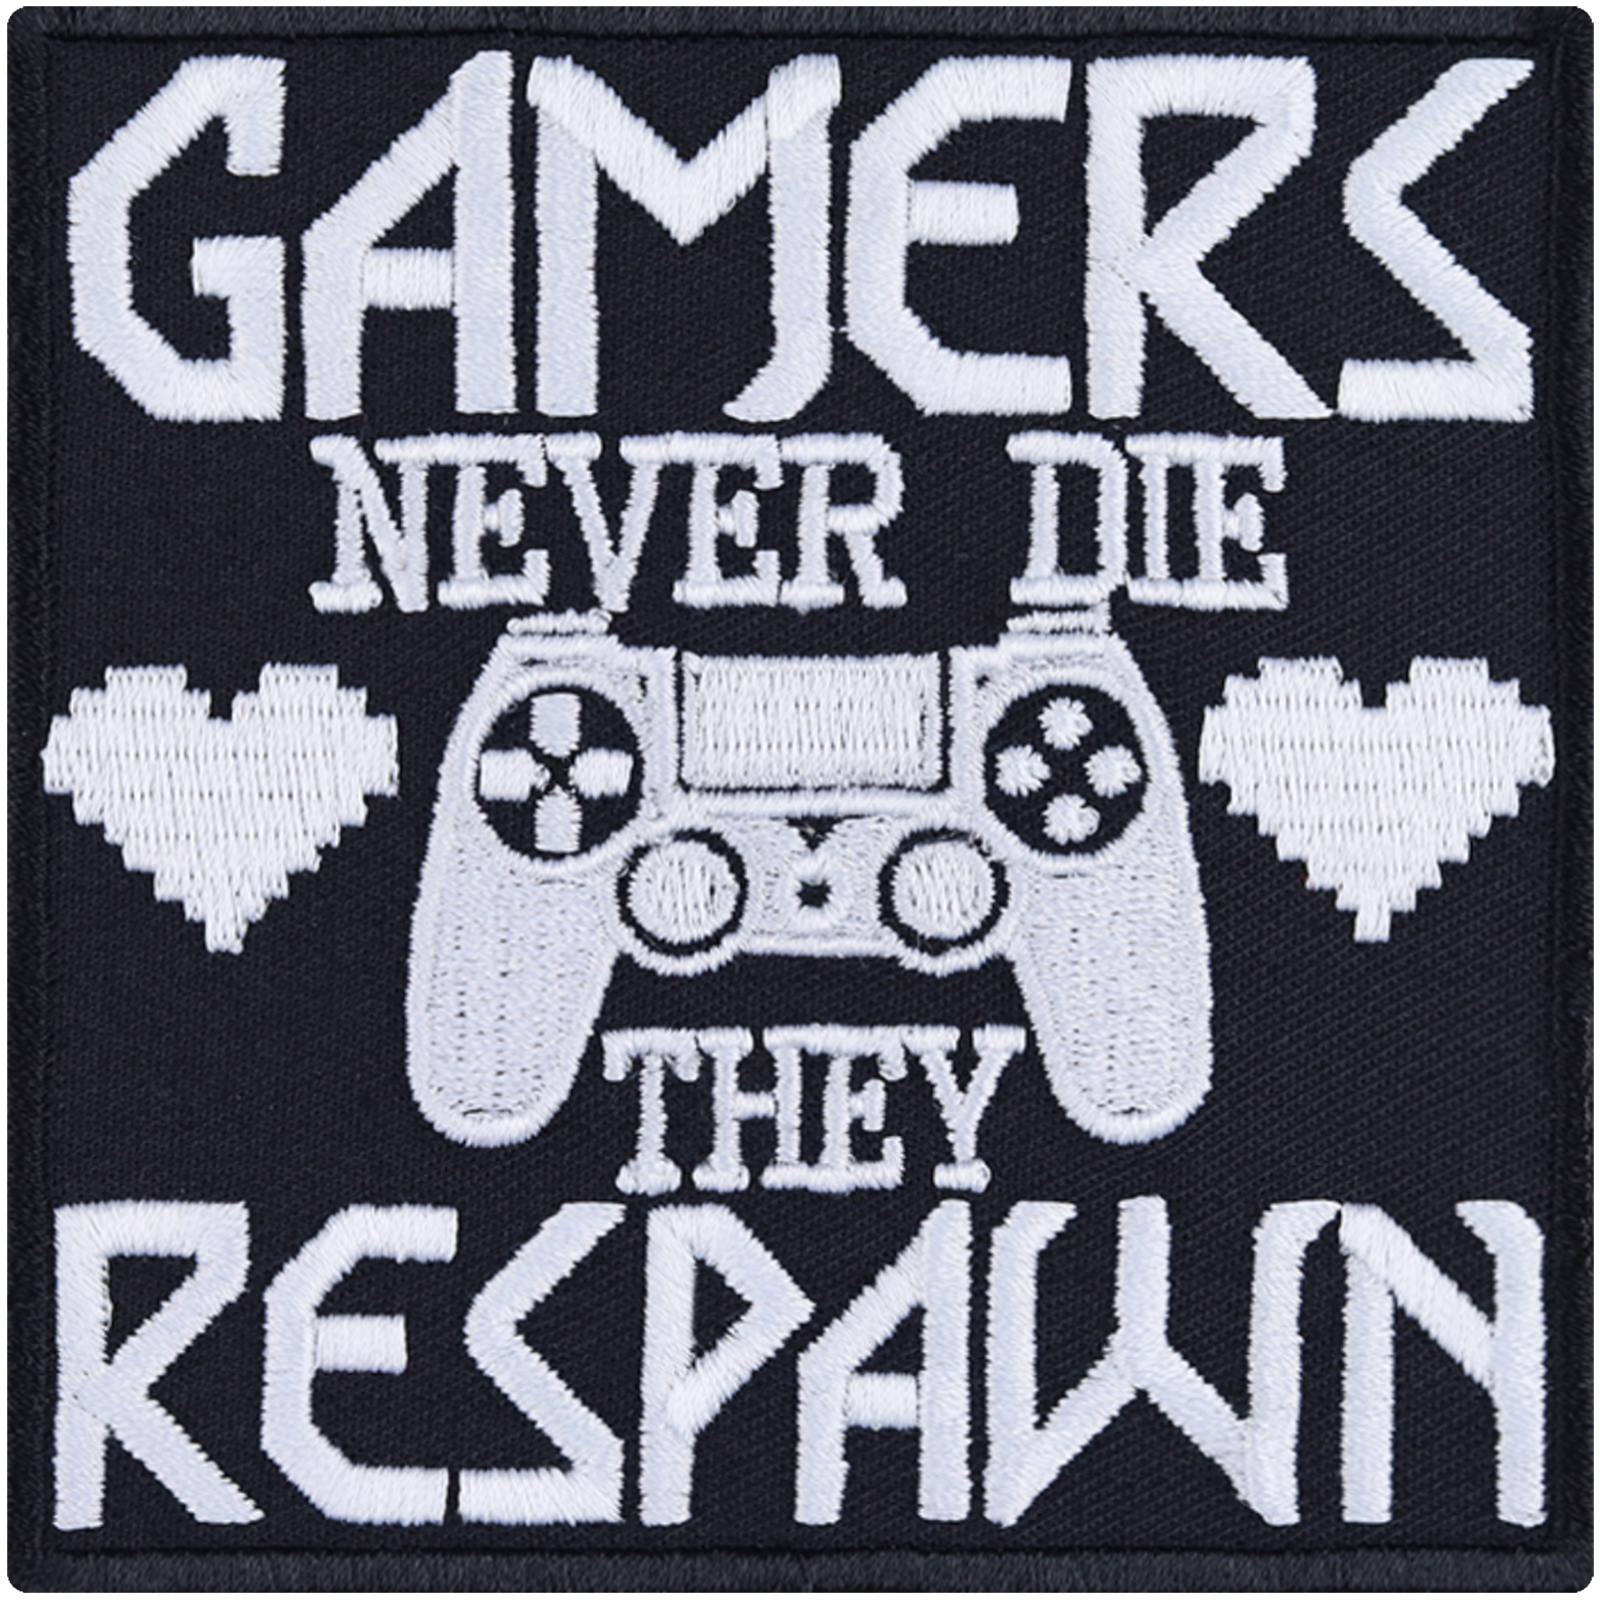 Gamers never die - they respawn - Patch